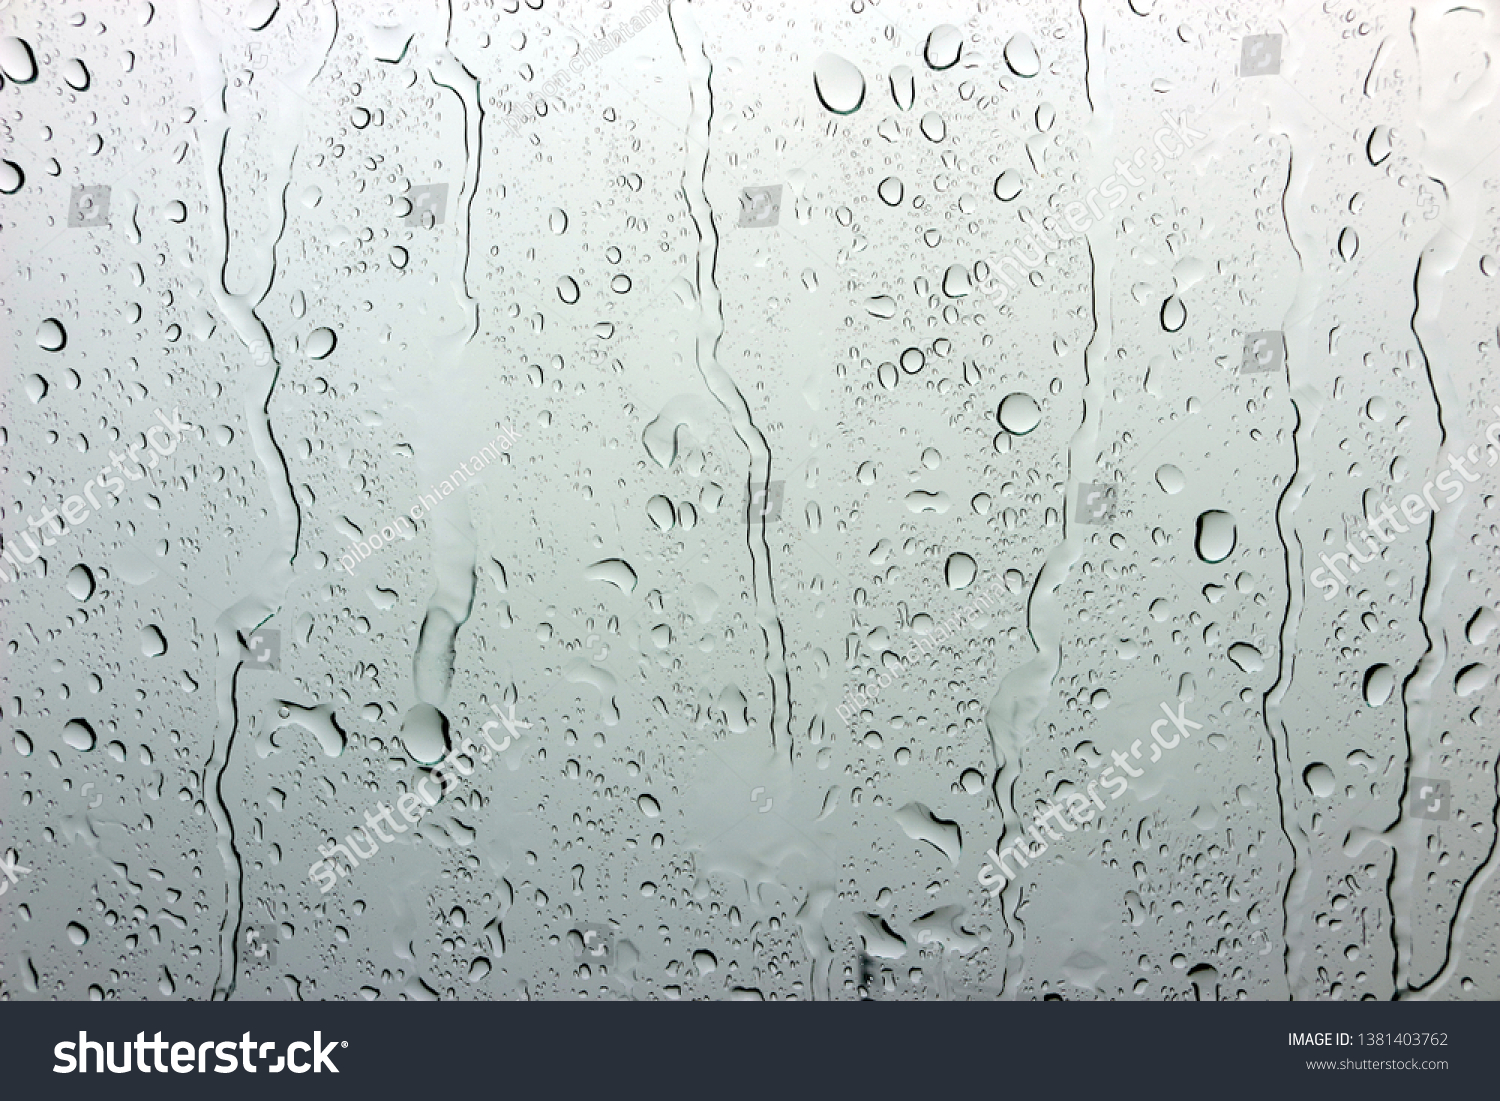 A small raindrop rests on the glass after rain. #1381403762